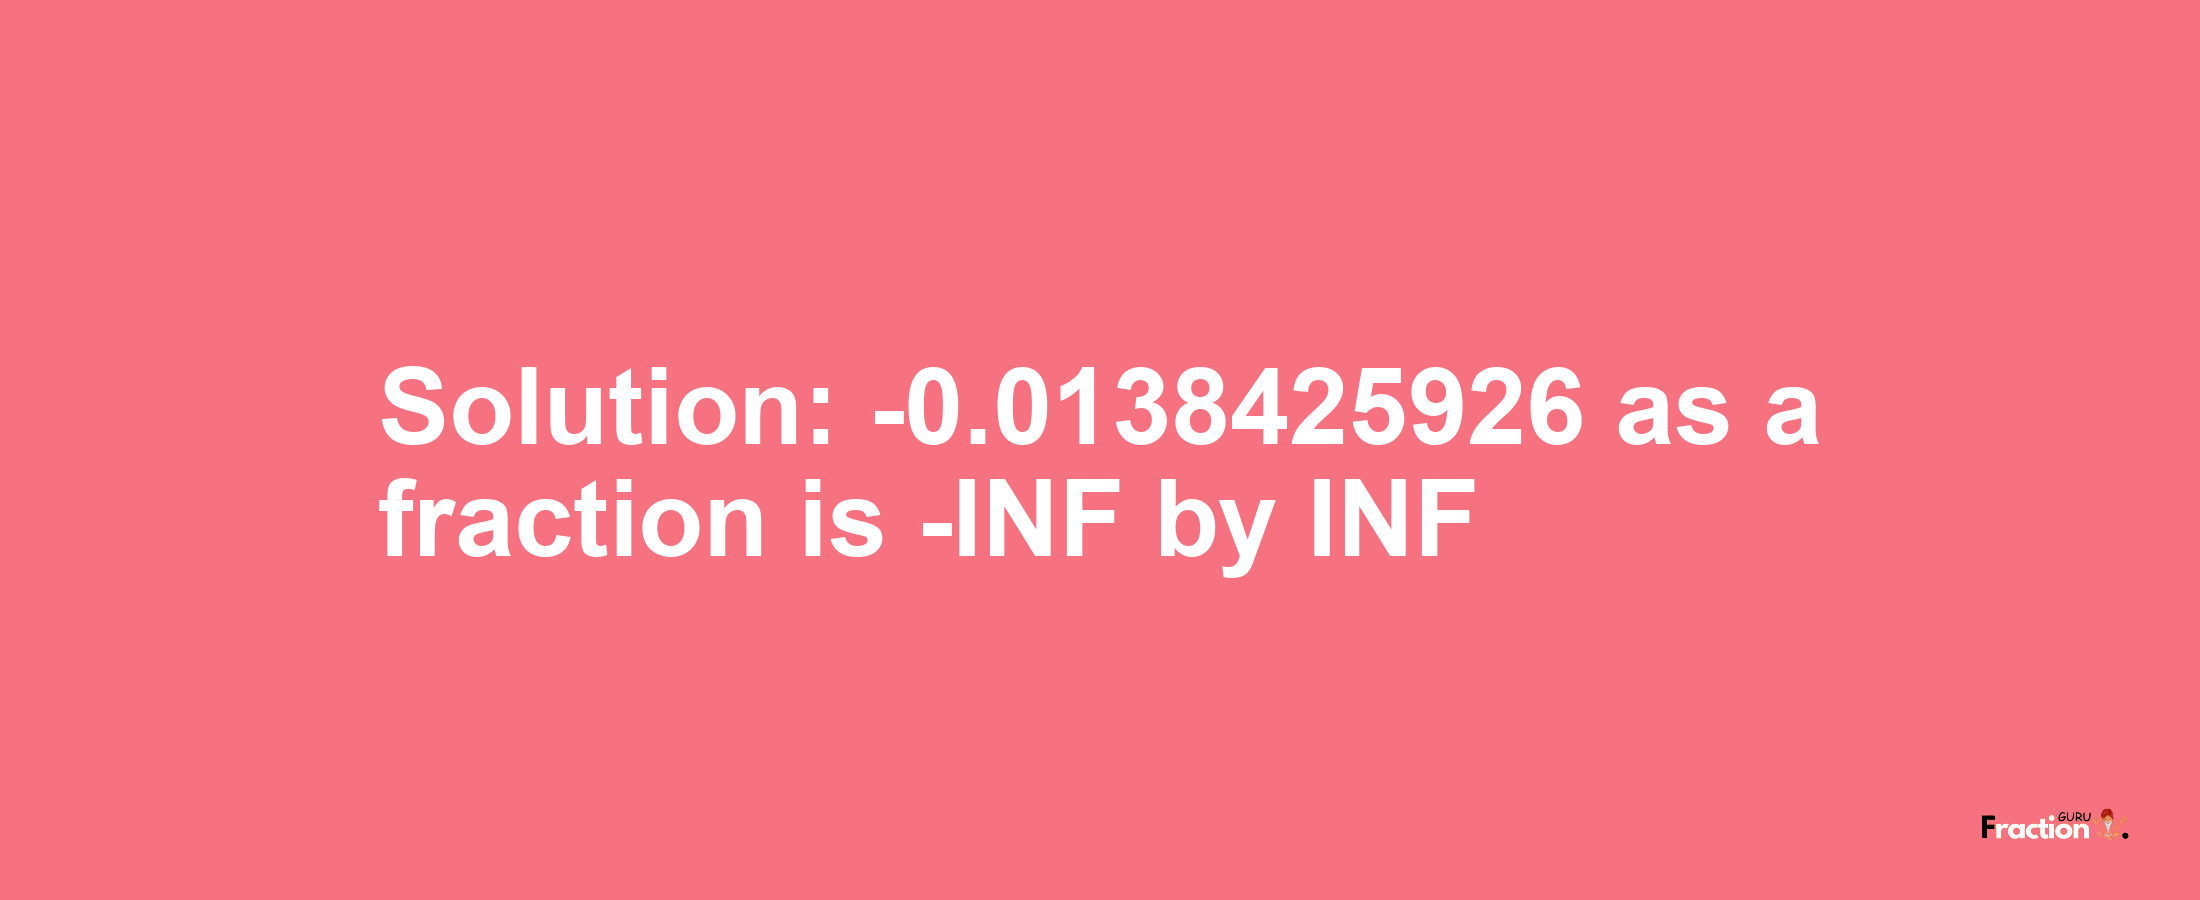 Solution:-0.0138425926 as a fraction is -INF/INF